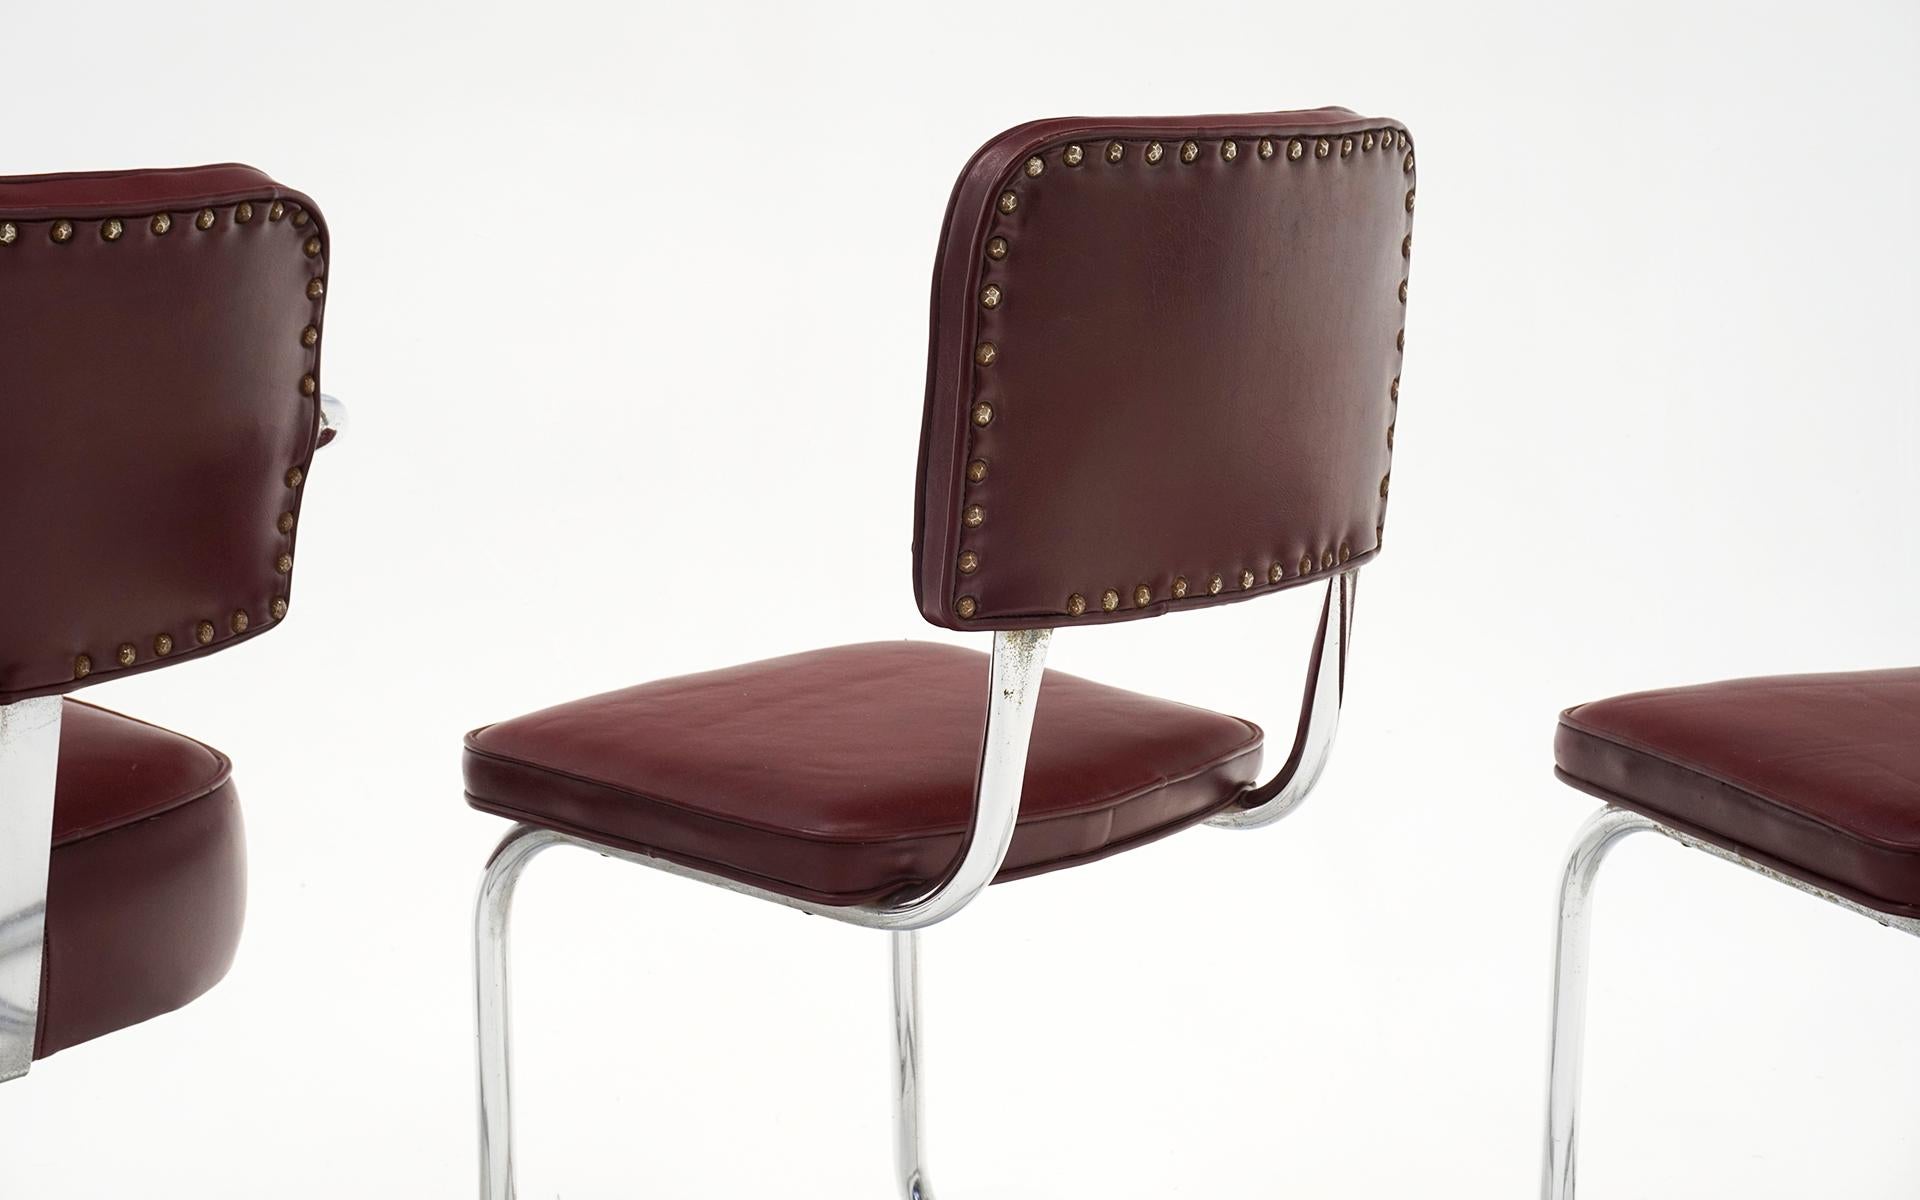 Mid-20th Century Set of Four 1940s Tubular Chrome Chairs in Original Oxblood Leather like Vinyl For Sale